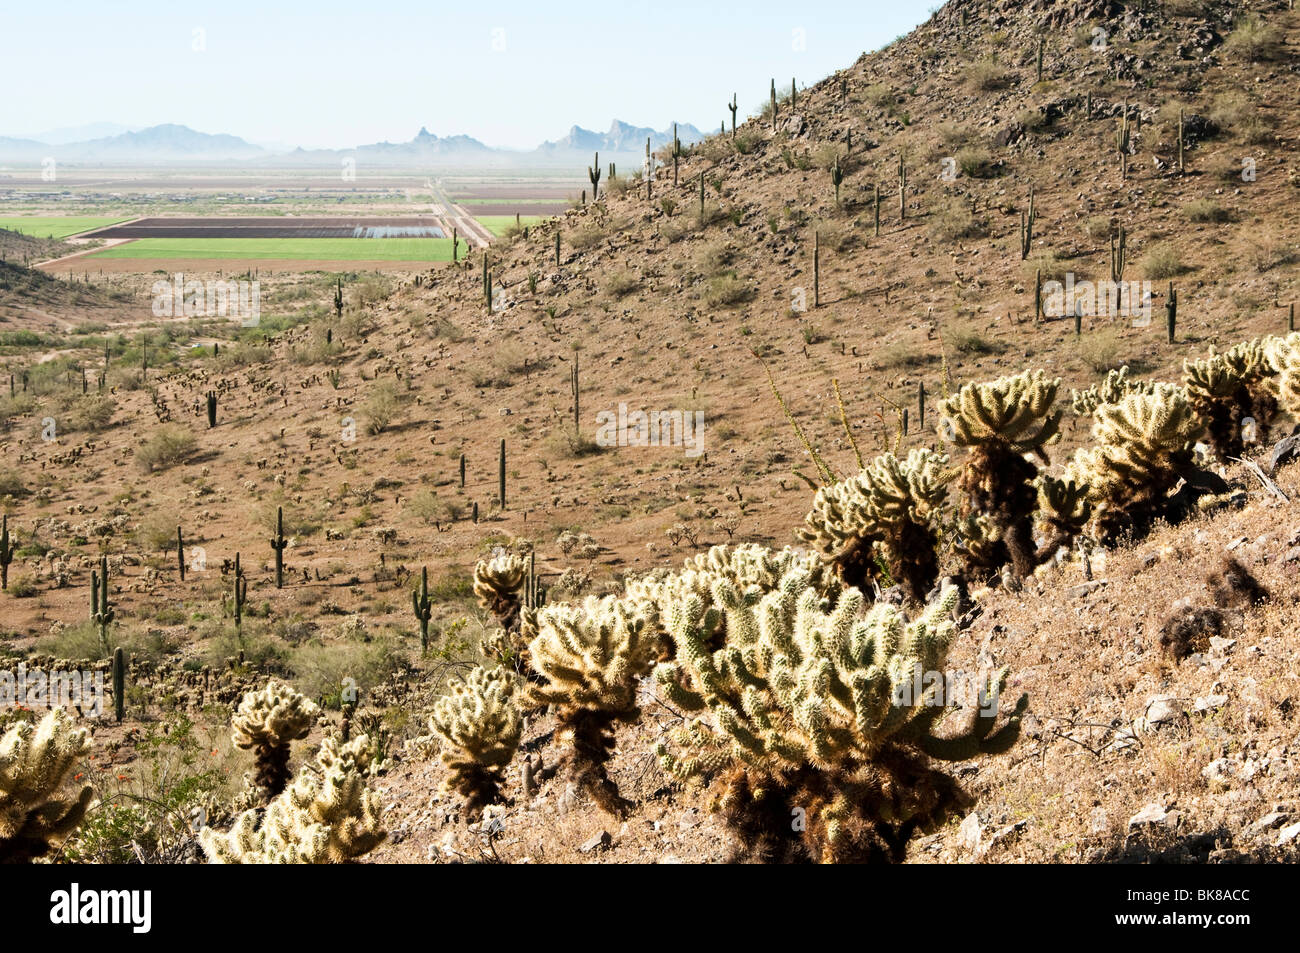 view of the Sonoran desert from a hiking trail on Casa Grande Mountain Stock Photo